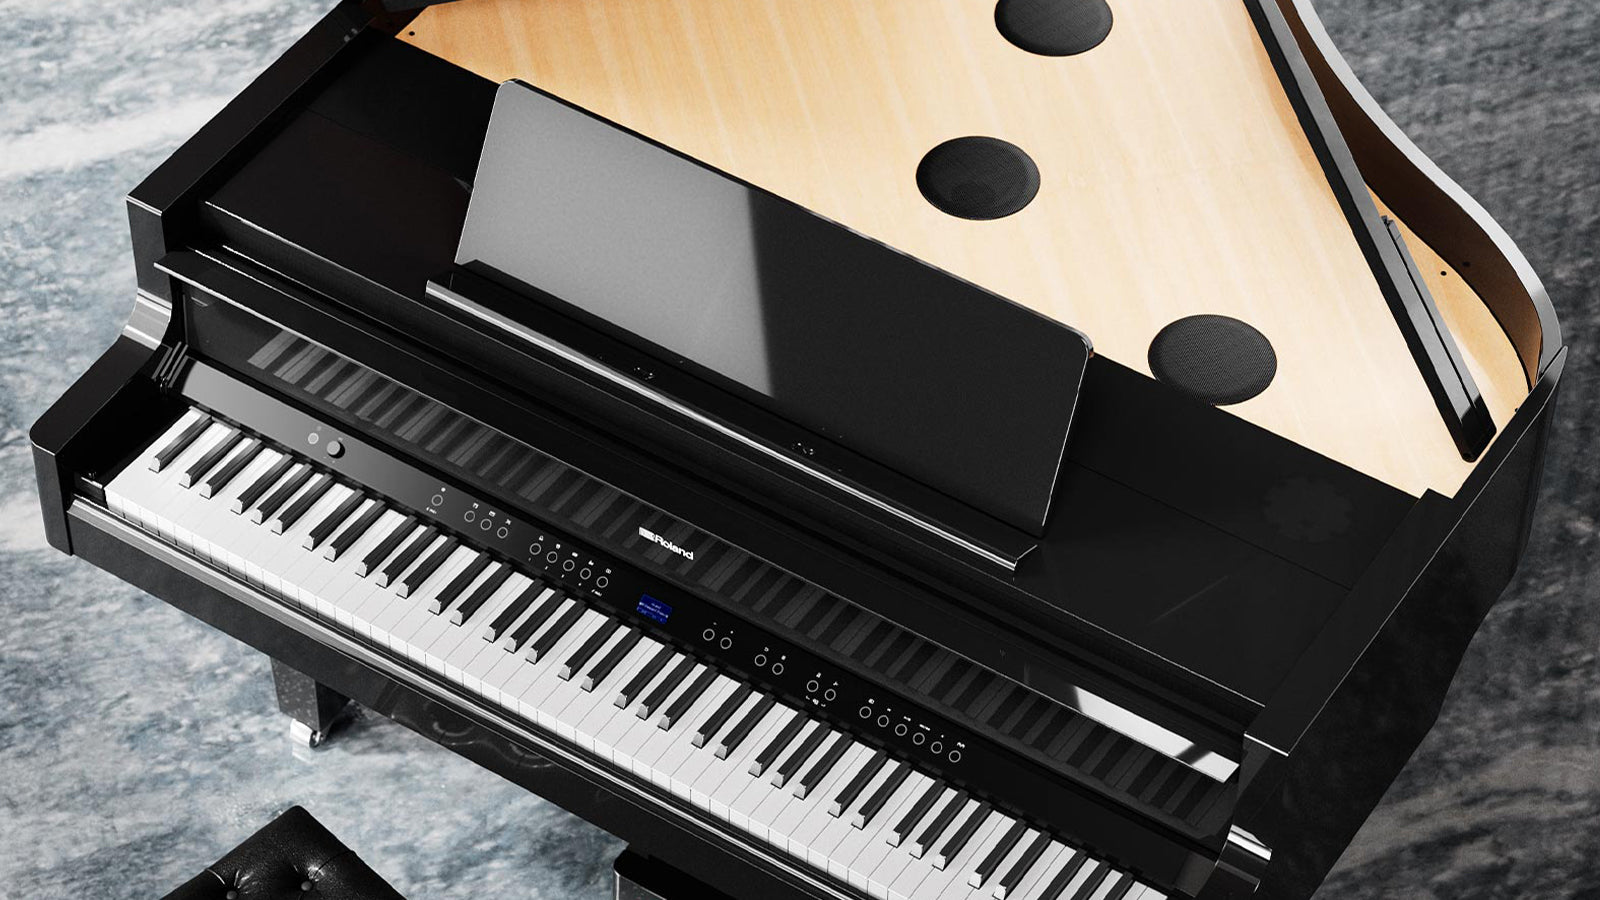 Roland GP-9M digital grand piano with moving keys from above